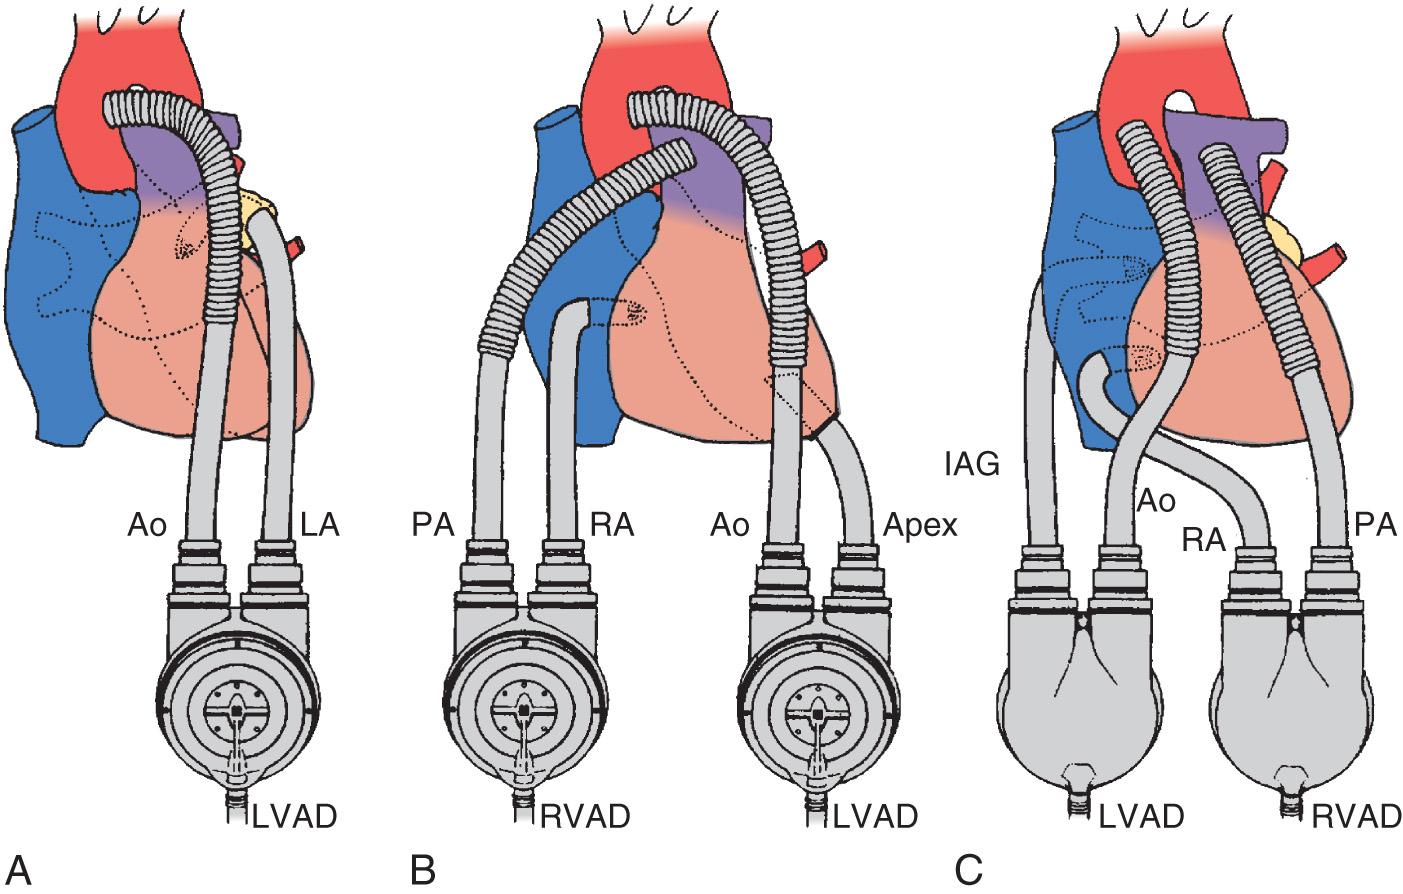 Fig. 22.5, (A–C) Classic cannulation strategies for mechanical circulatory support. Ao, Aorta; IAG, interatrial groove; LA, left atrium; LVAD, left ventricular assist device; PA, pulmonary artery; RA, right atrium; RVAD, right ventricular assist device.